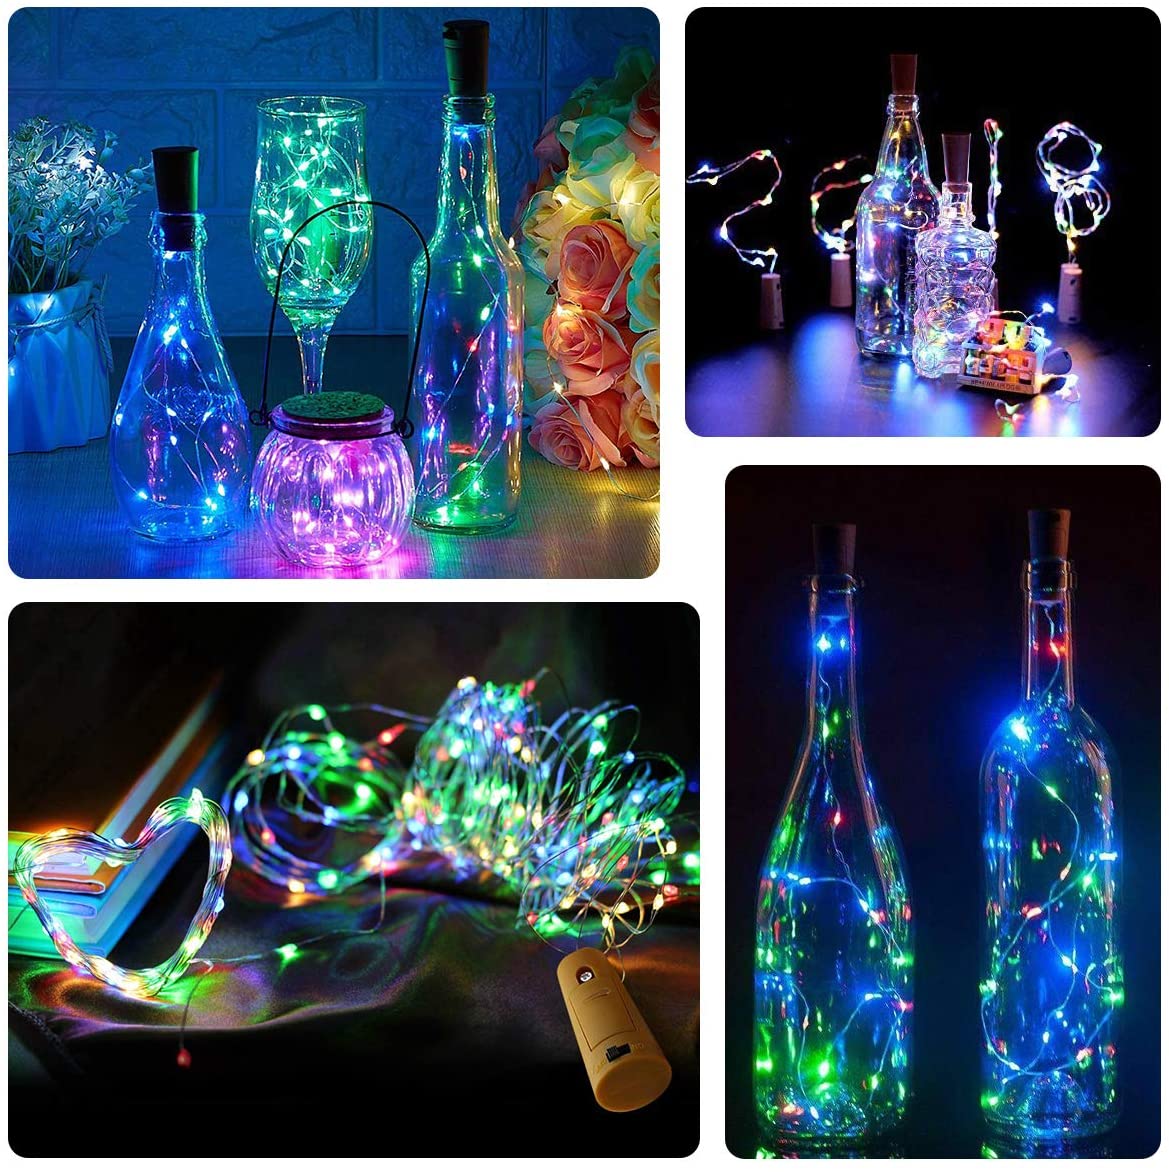 Bottle Lights with Cork, 10 Pack Copper Wire with 20 LEDs 2M LED String Lights, Battery Operated